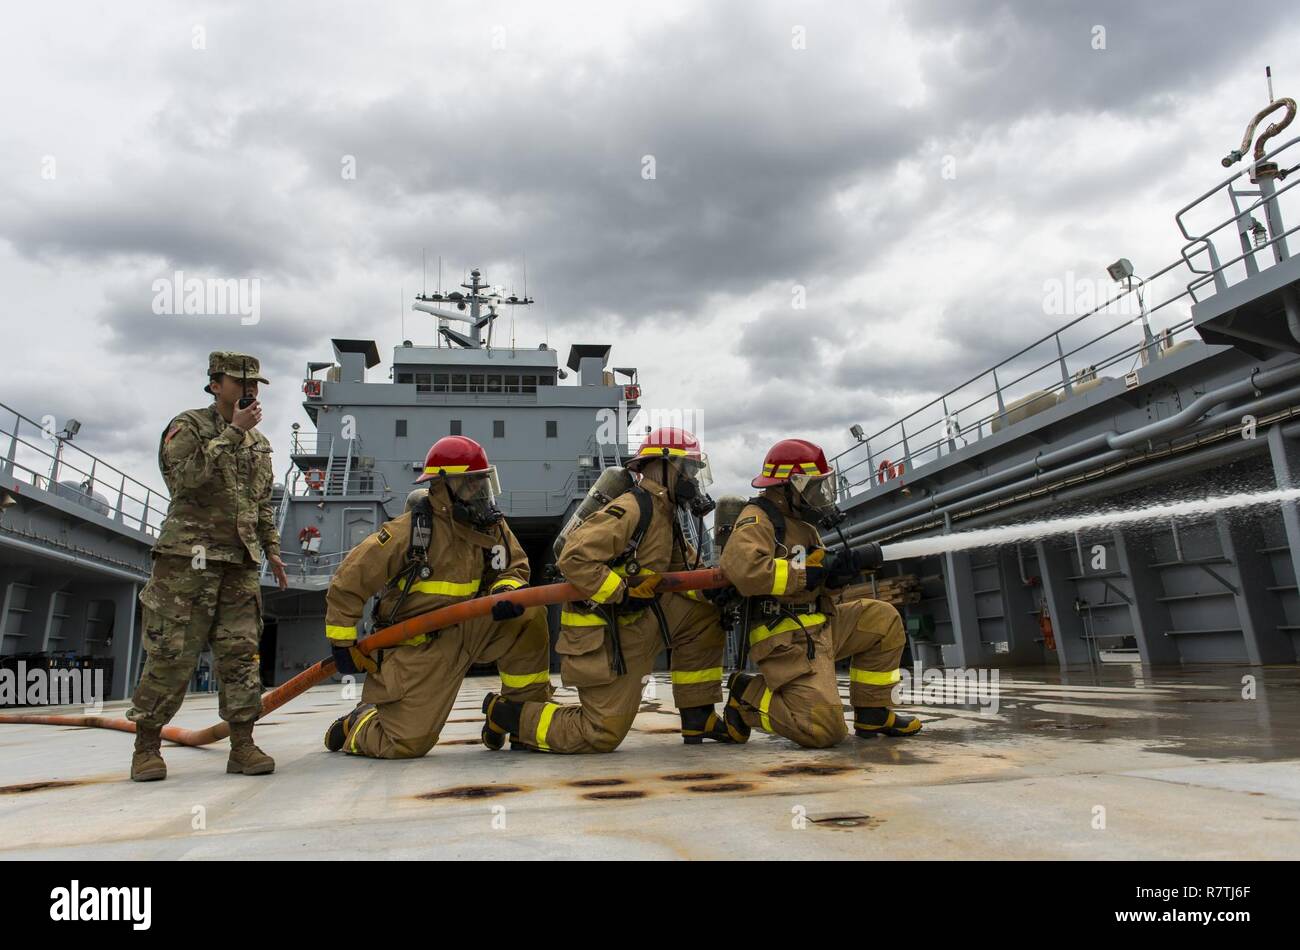 A team of U.S. Army Reserve watercraft operators from the 949th Transportation Company, a unit which specializes in watercraft operations, cargo and watercraft engineering, replicate a fire-fighting drill for a series of portraits and images depicting their military occupation specialties during a photo shoot that took place on board a Logistics Support Vessel in Baltimore, Md., on April 7-8, 2017. Stock Photo